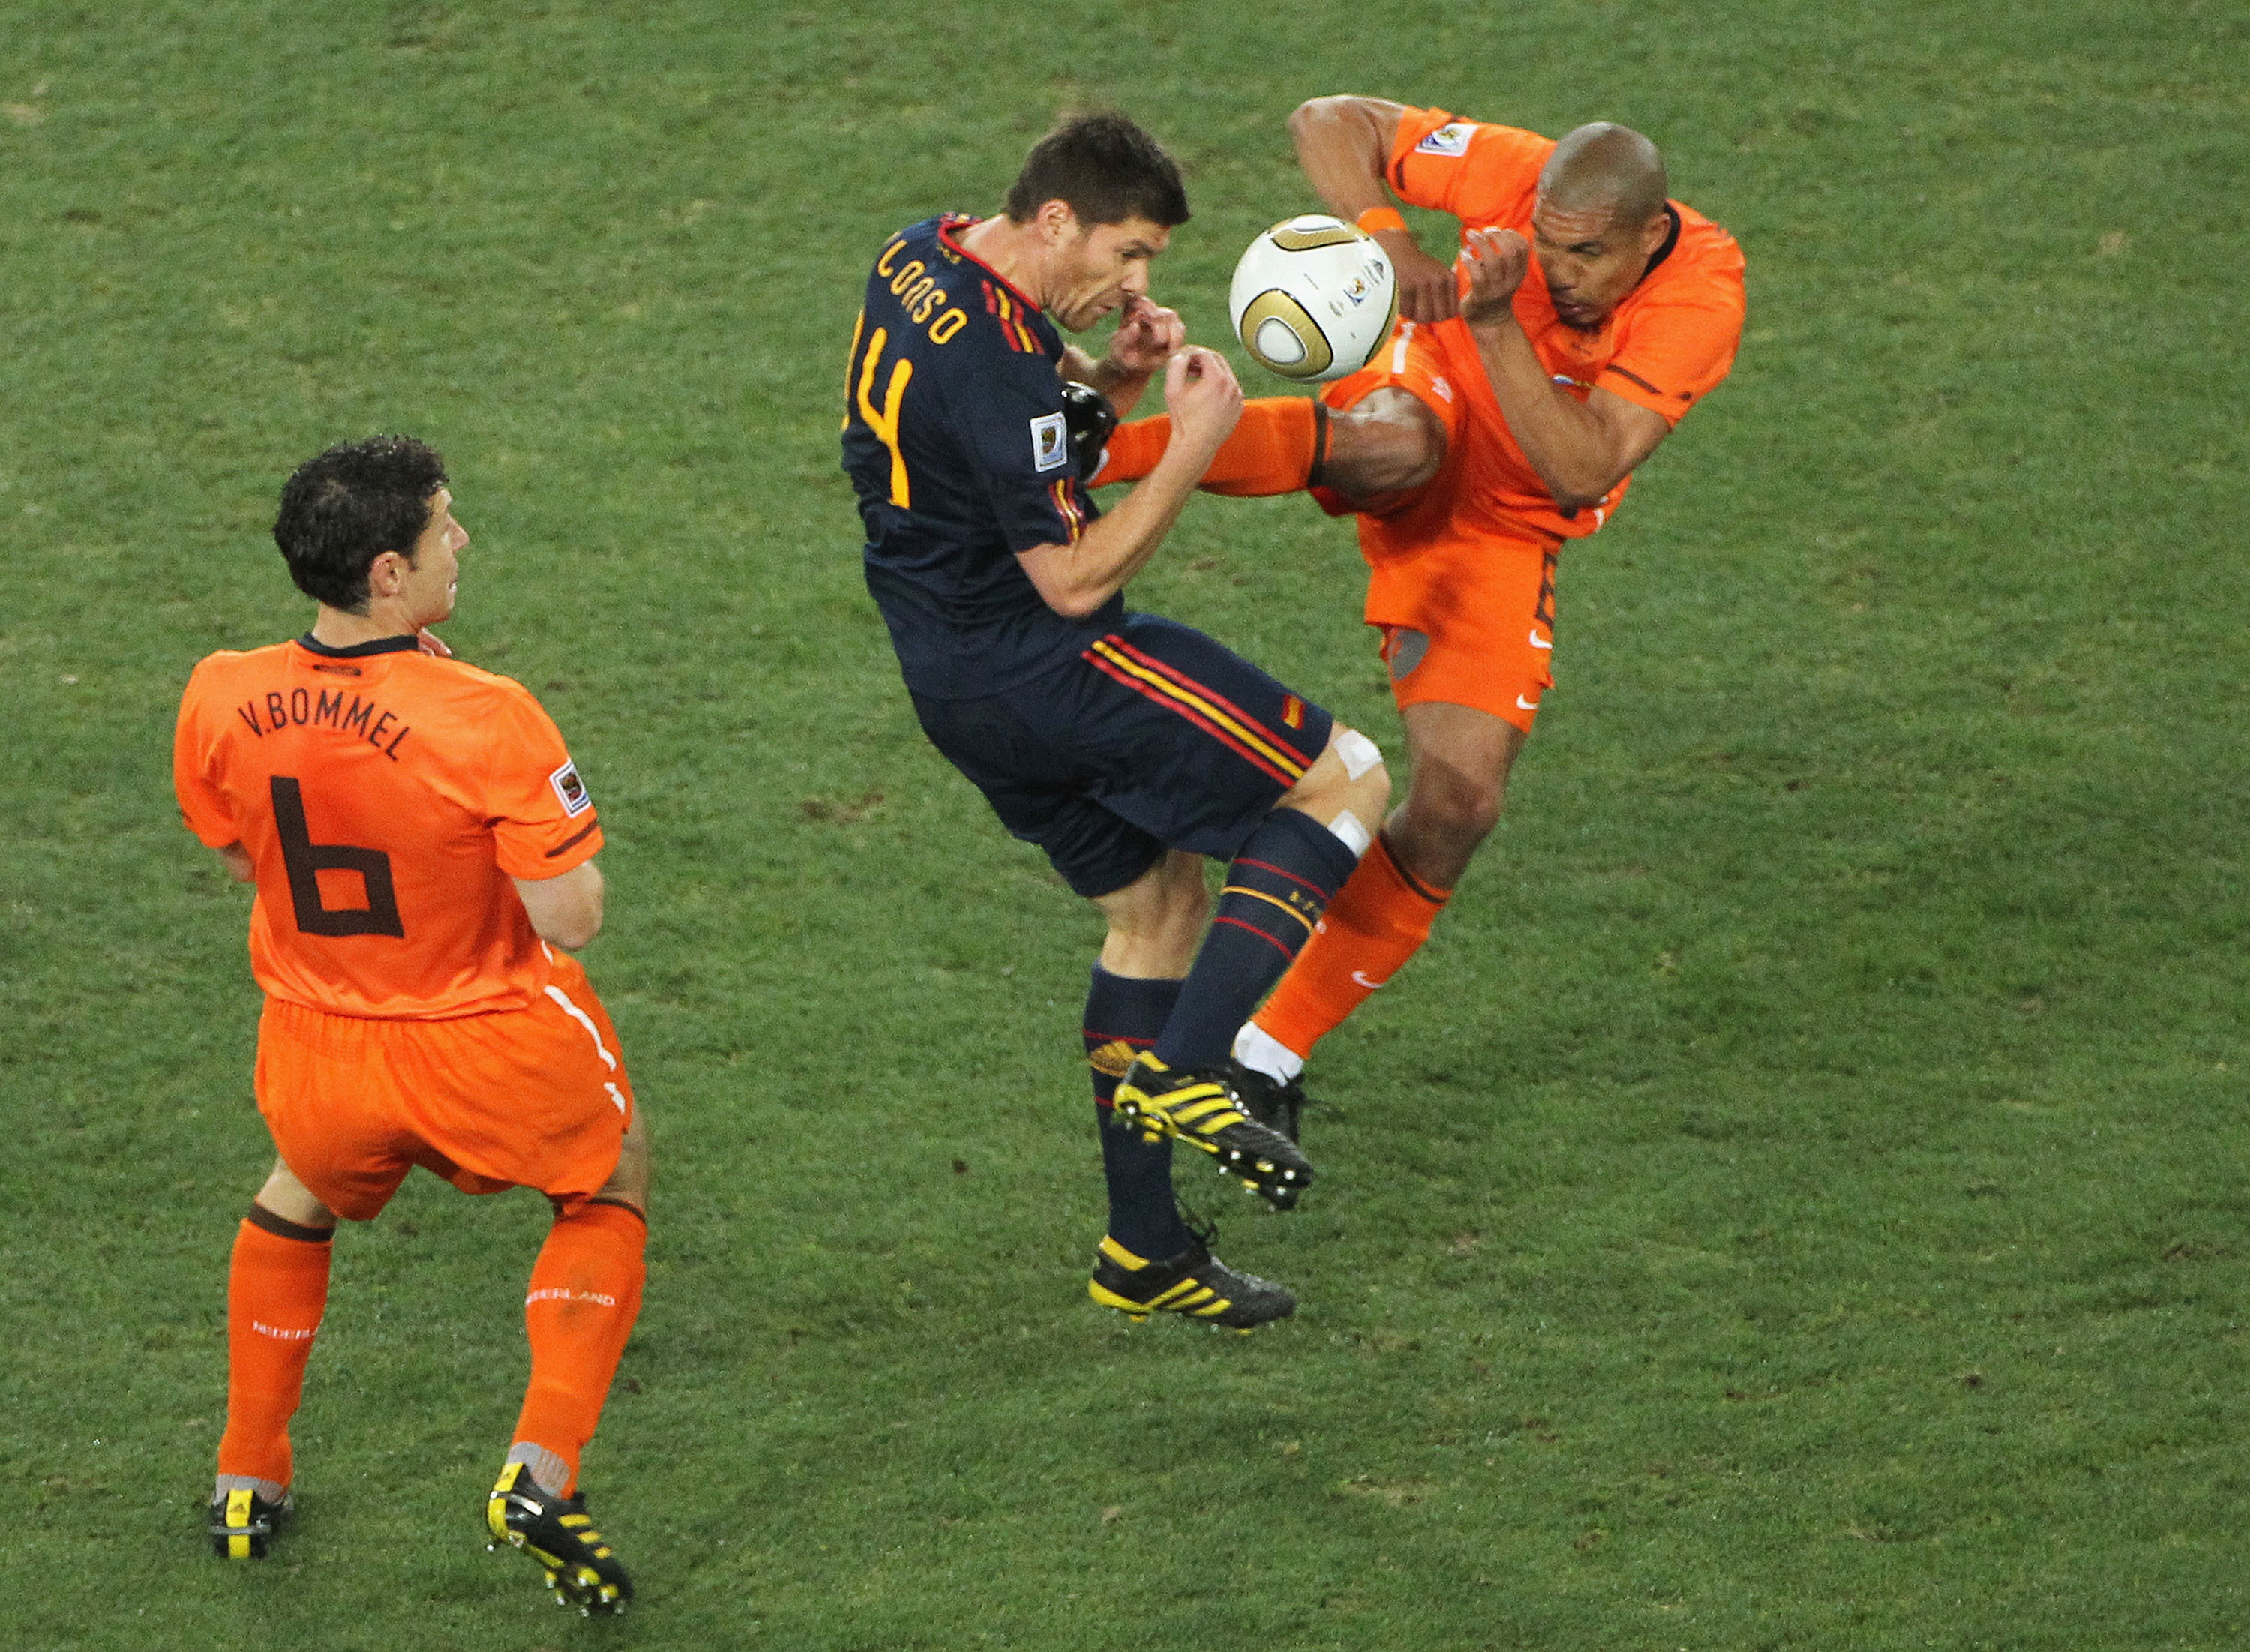 JOHANNESBURG, SOUTH AFRICA - JULY 11:  Nigel De Jong of the Netherlands tackles Xabi Alonso of Spain with a kick in the chest during the 2010 FIFA World Cup South Africa Final match between Netherlands and Spain at Soccer City Stadium on July 11, 2010 in